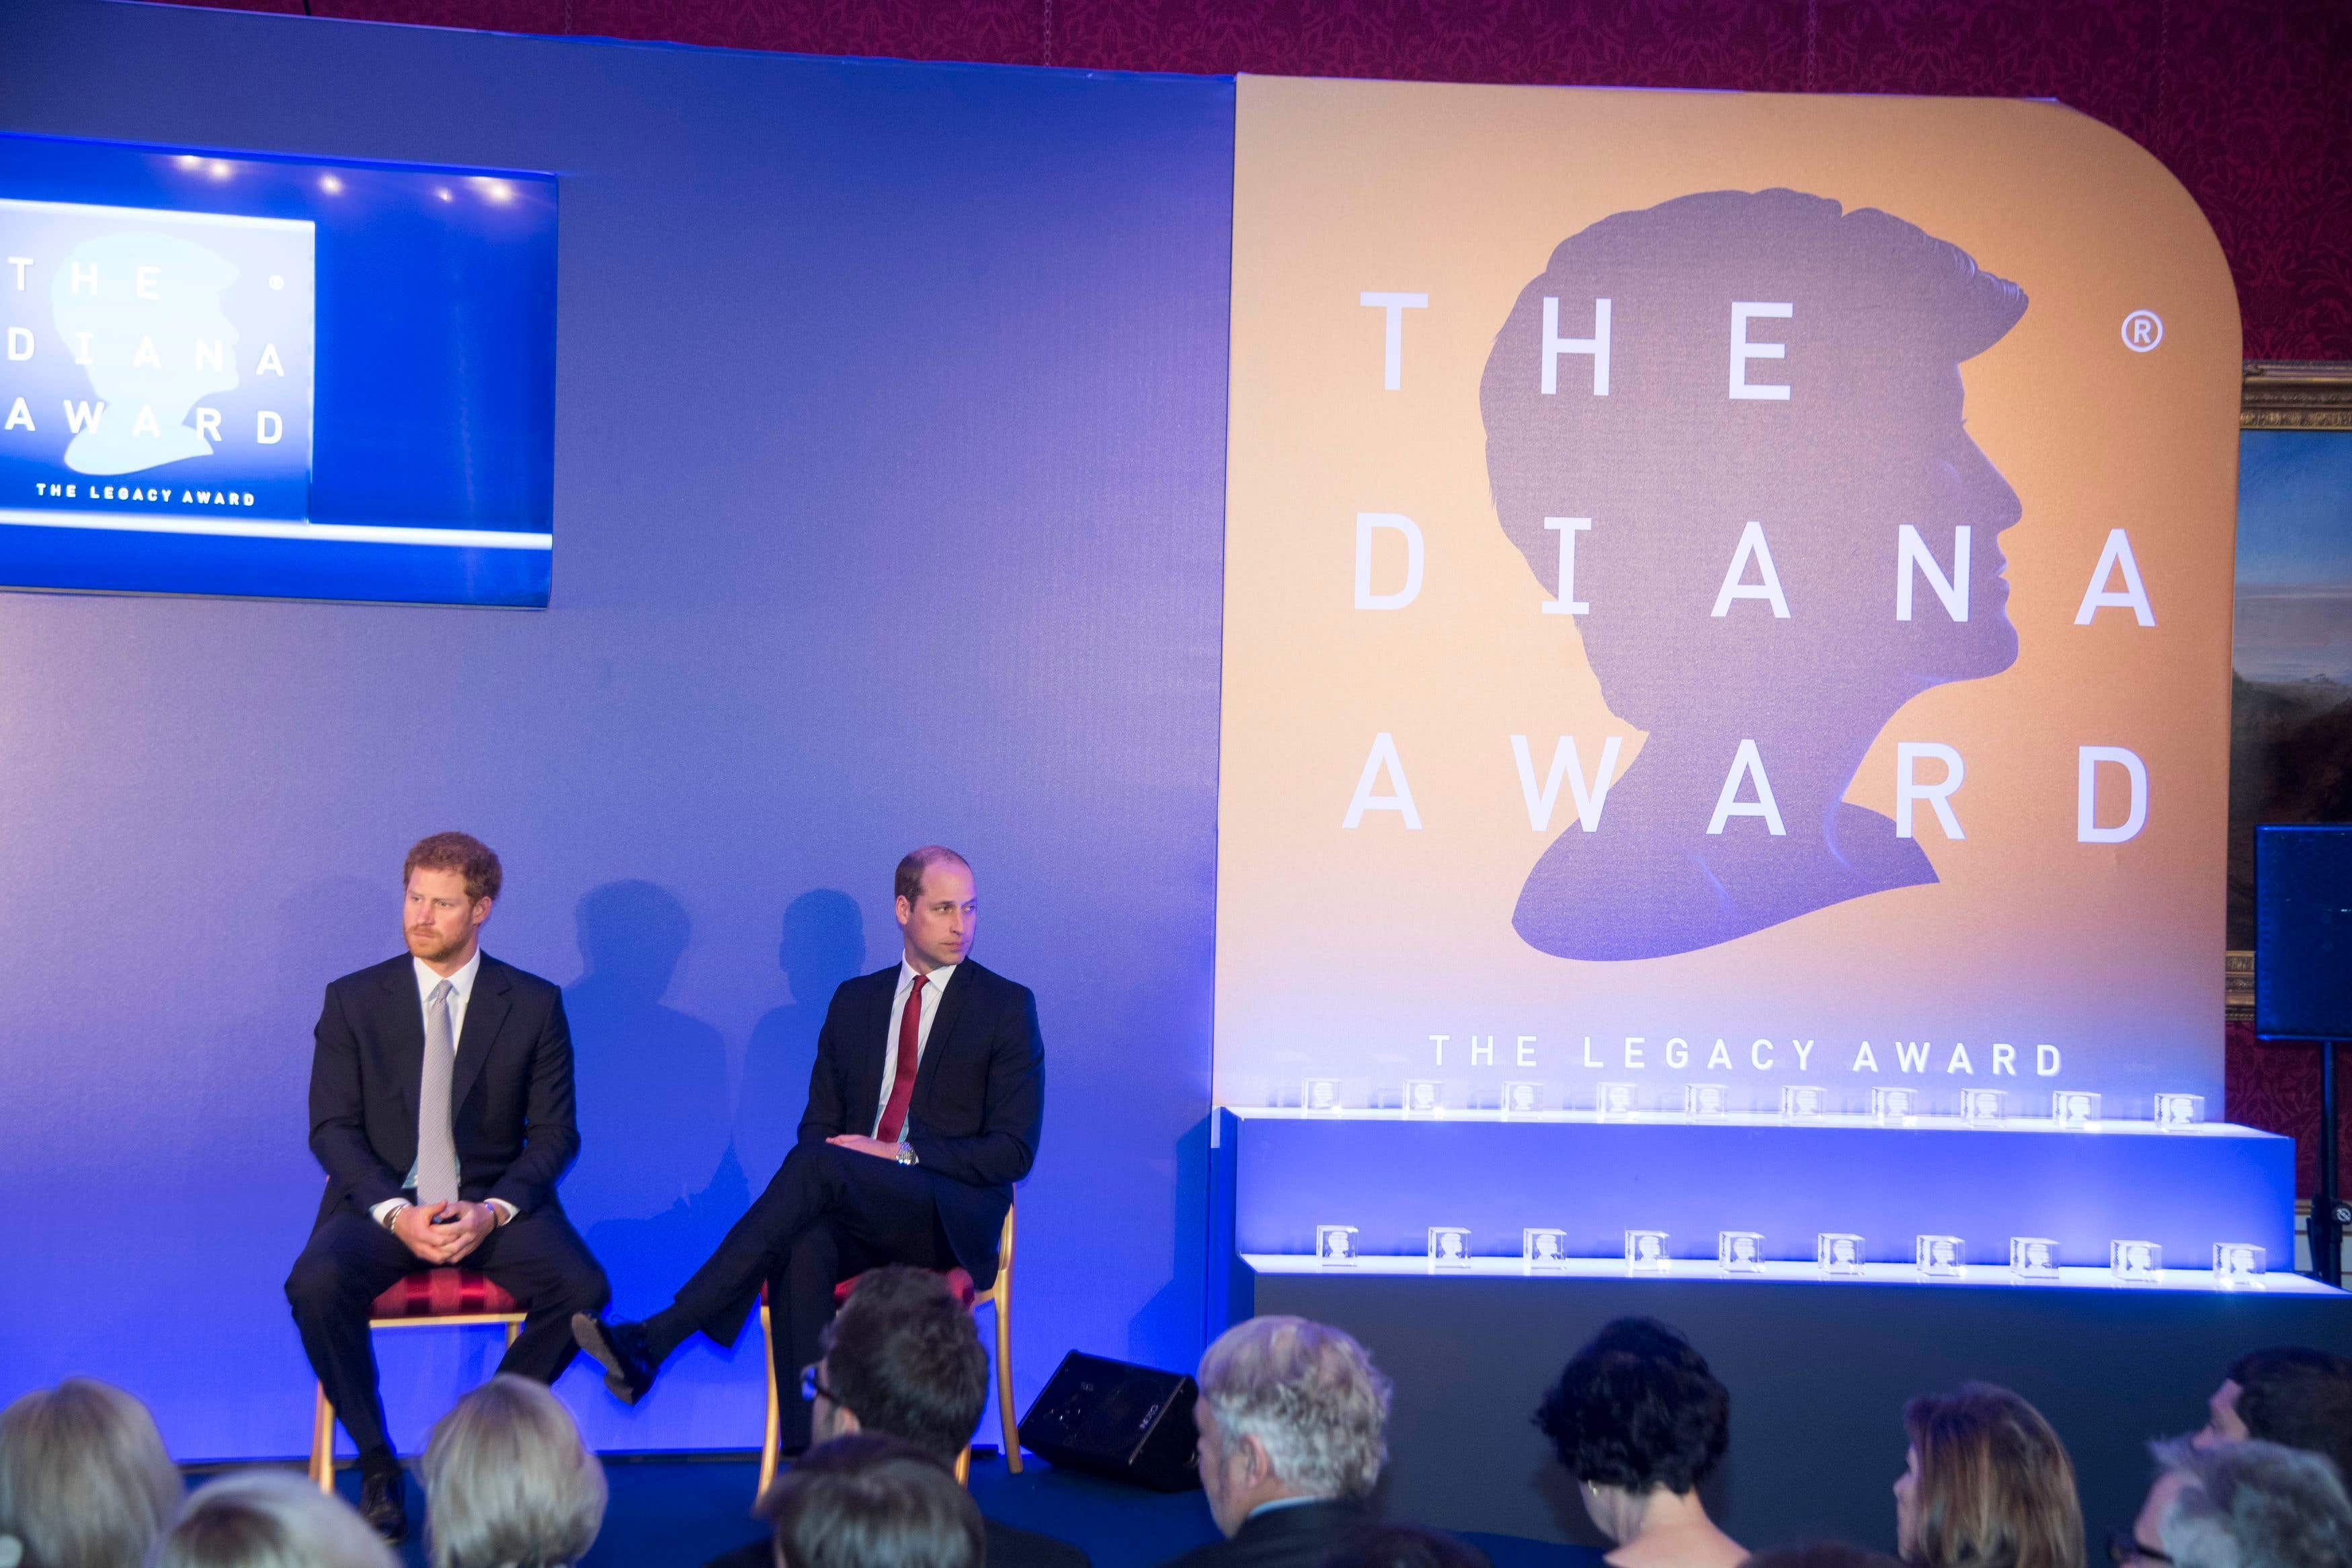 William and Harry have presented the awards together in previous years